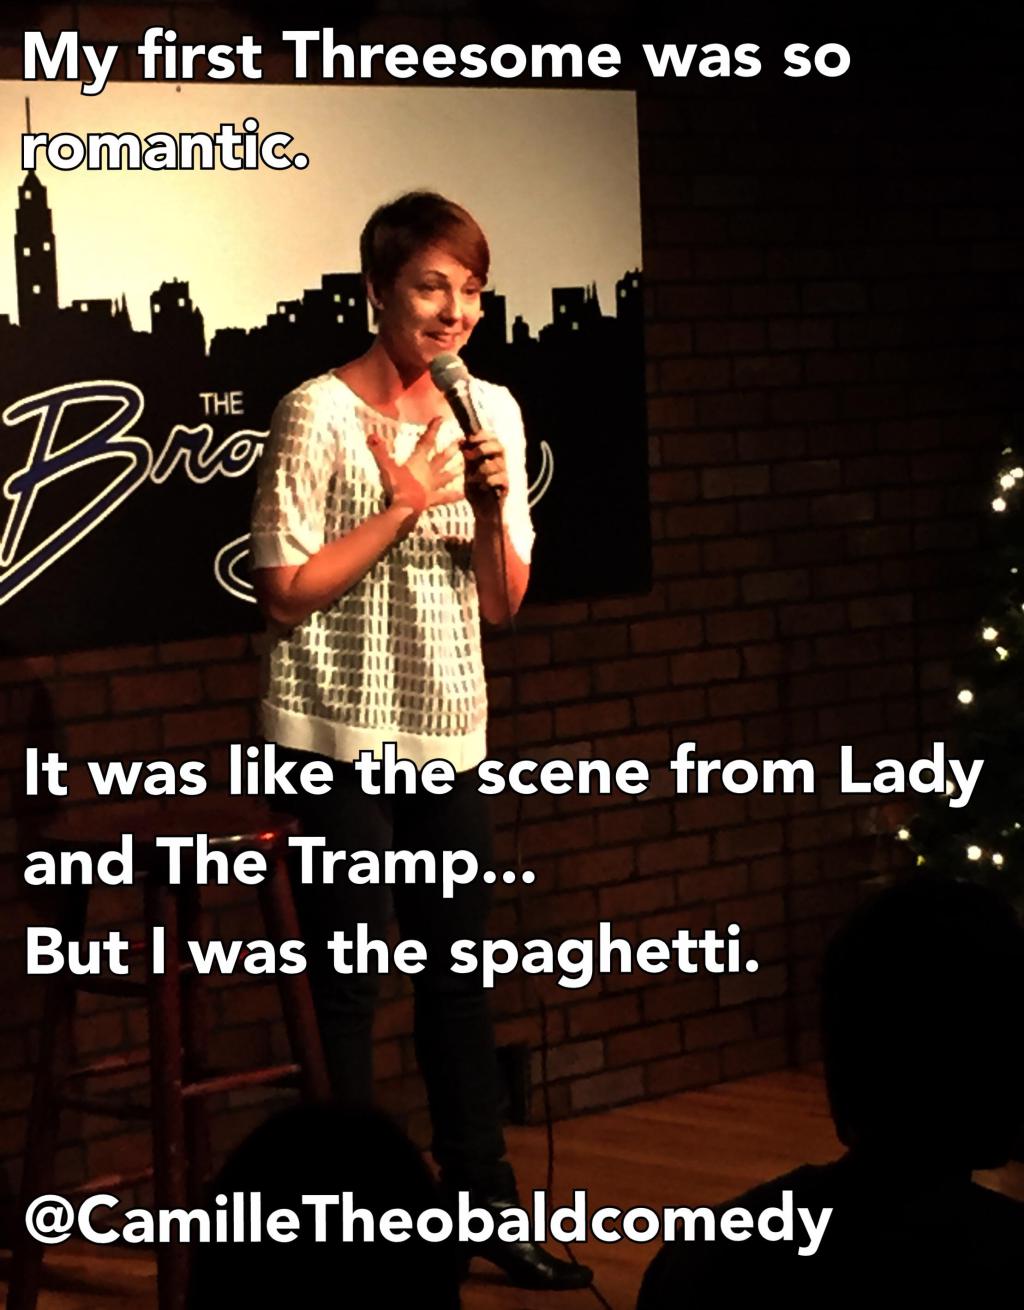 work meme about being the spaghetti in a threesome